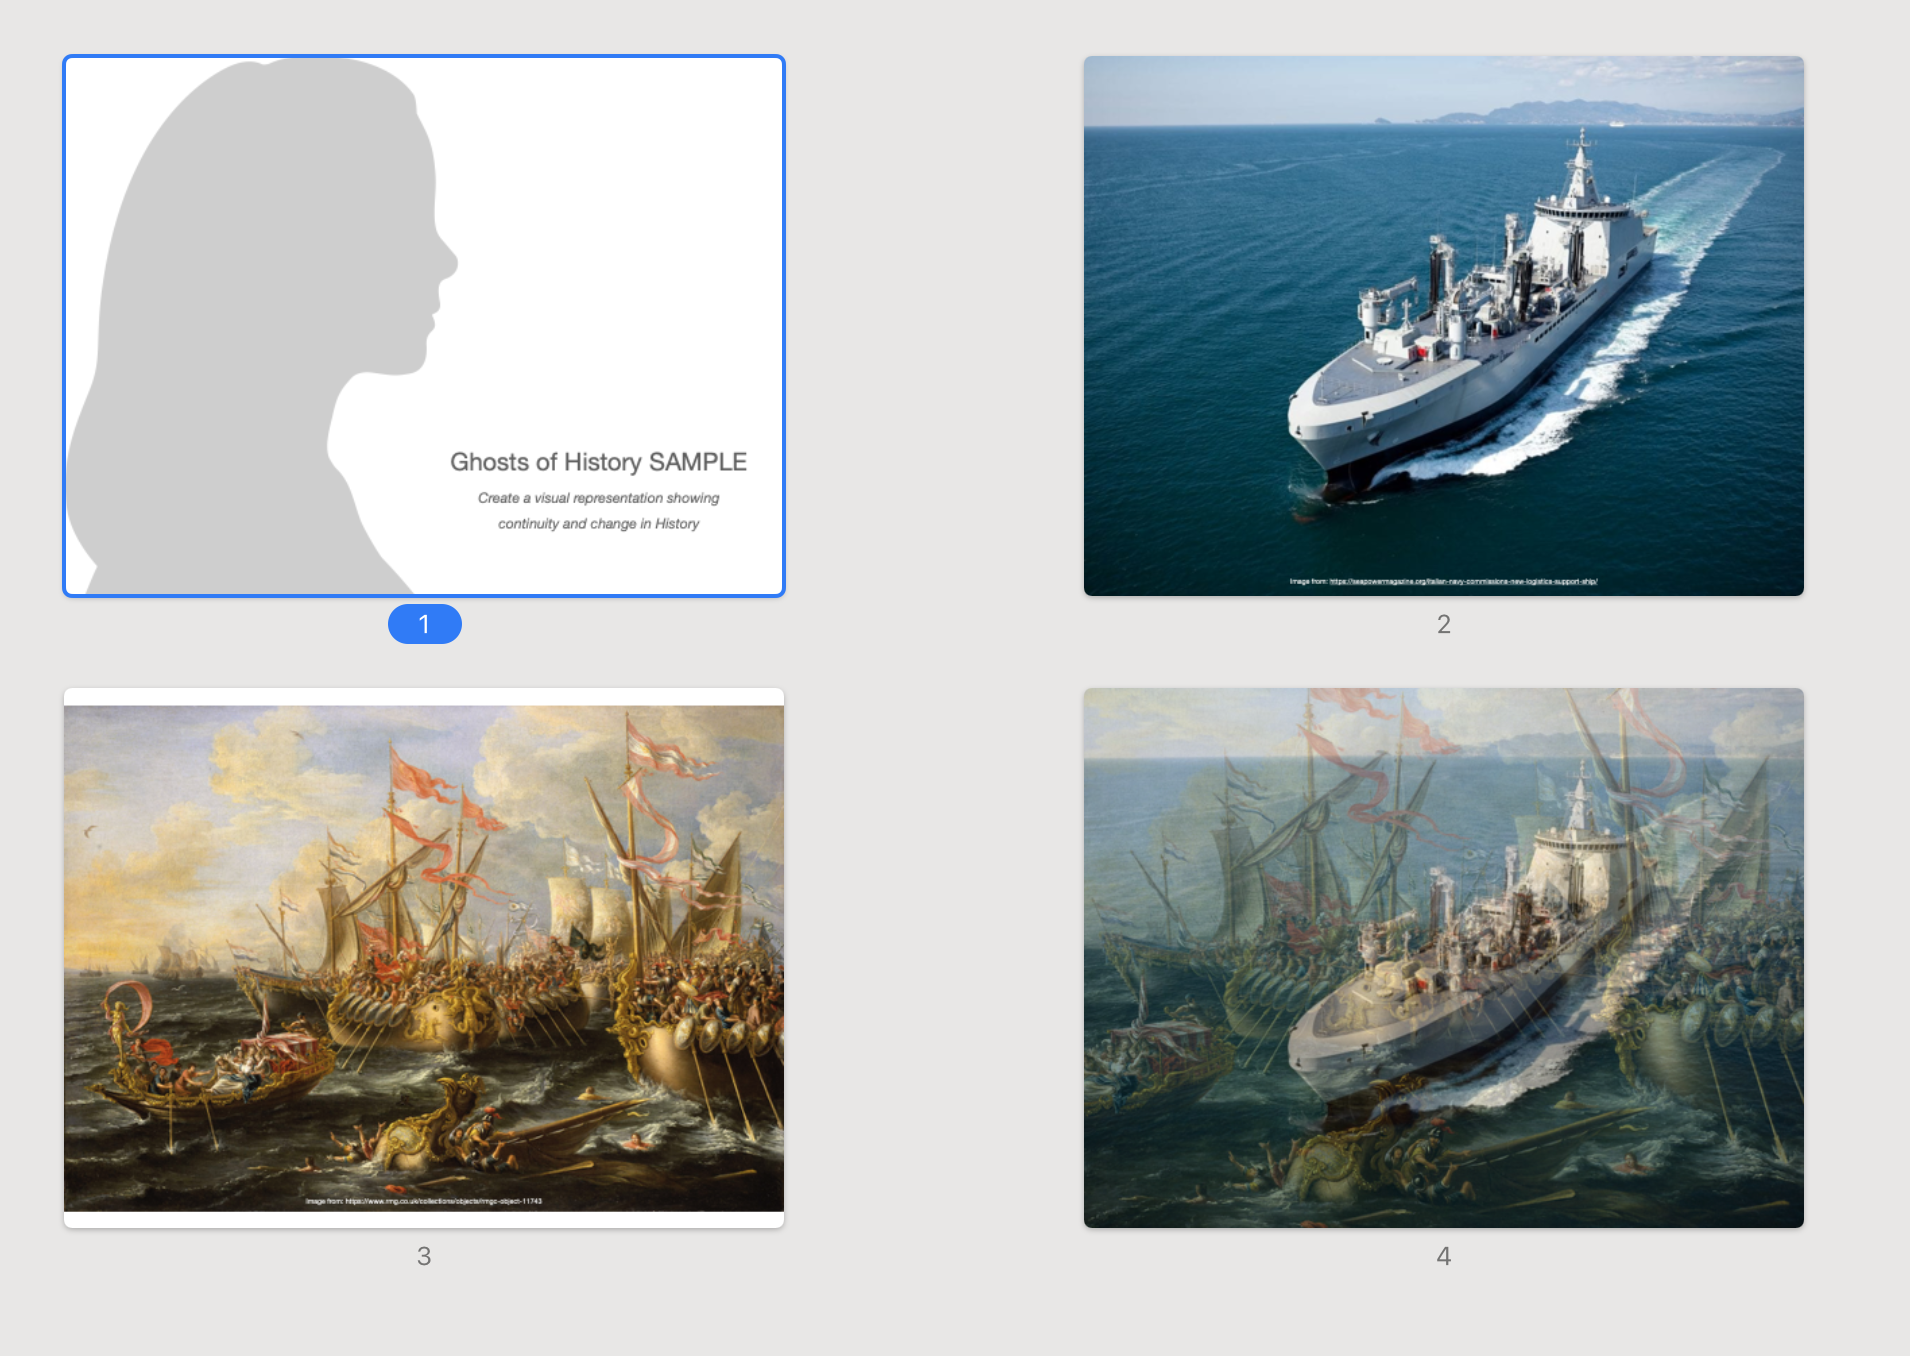 Image of four slides showing original images as well as a merged image of the Battle of Actium.